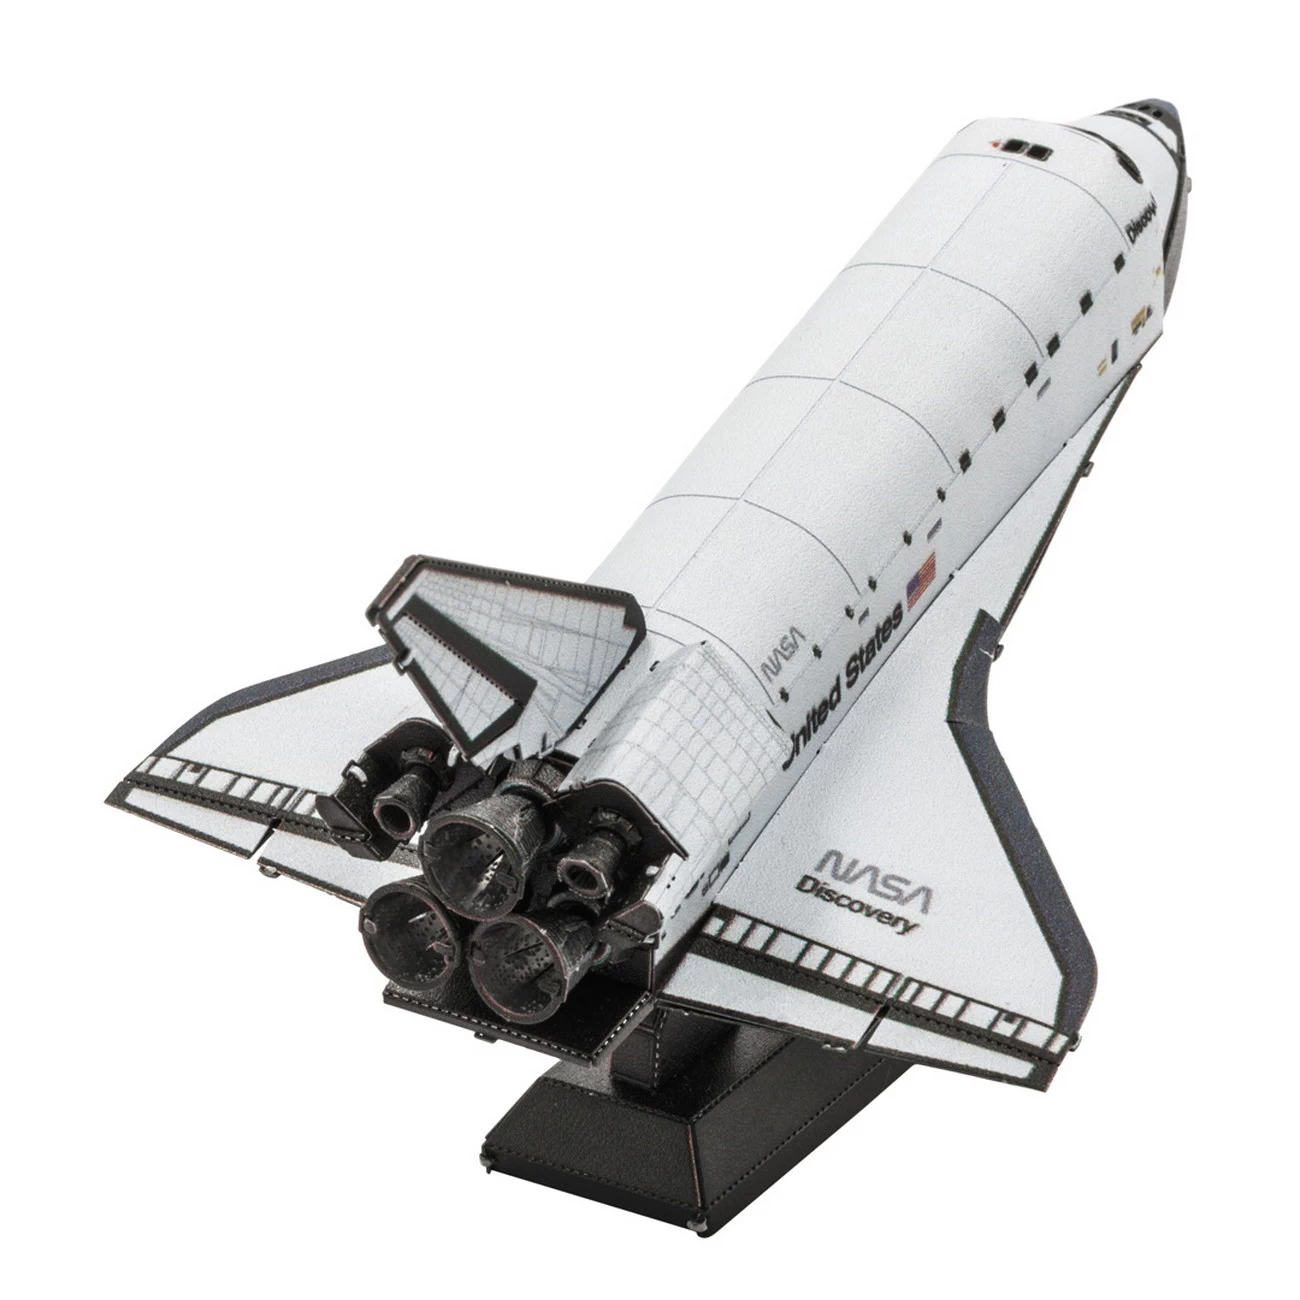 Space Shuttle Discovery &Booster (04736)